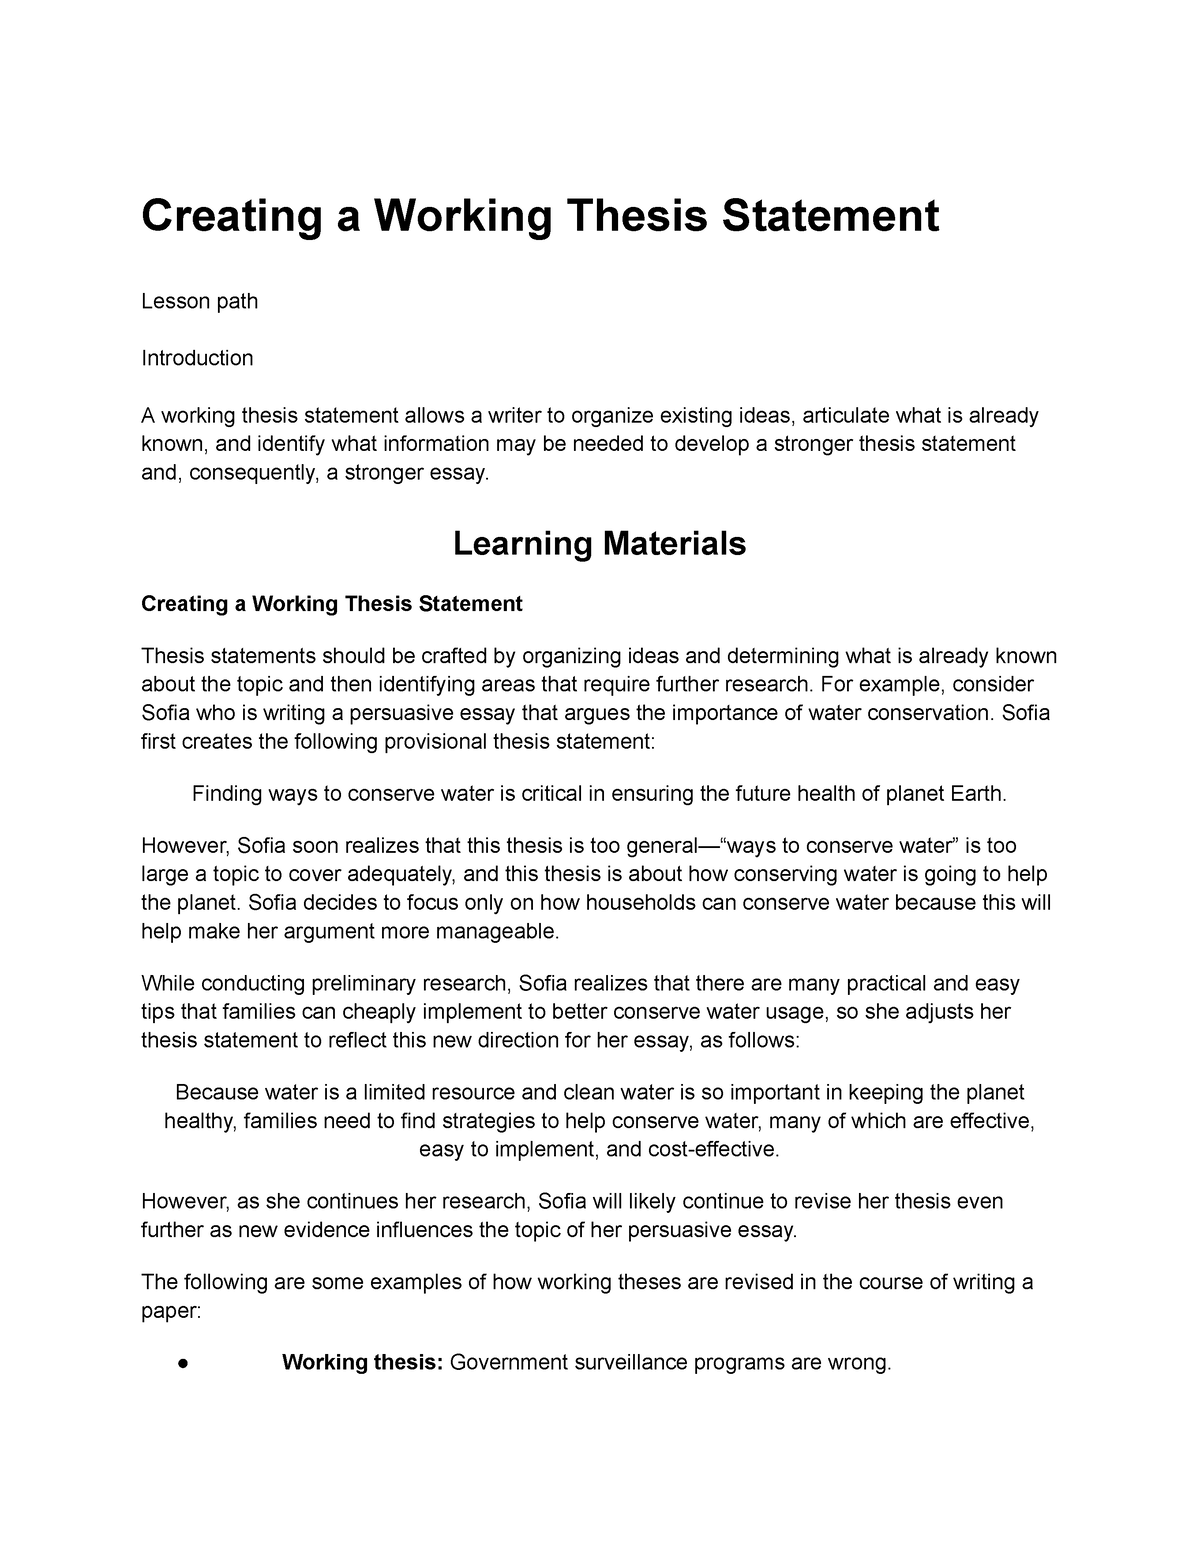 it is best to create a working thesis statement